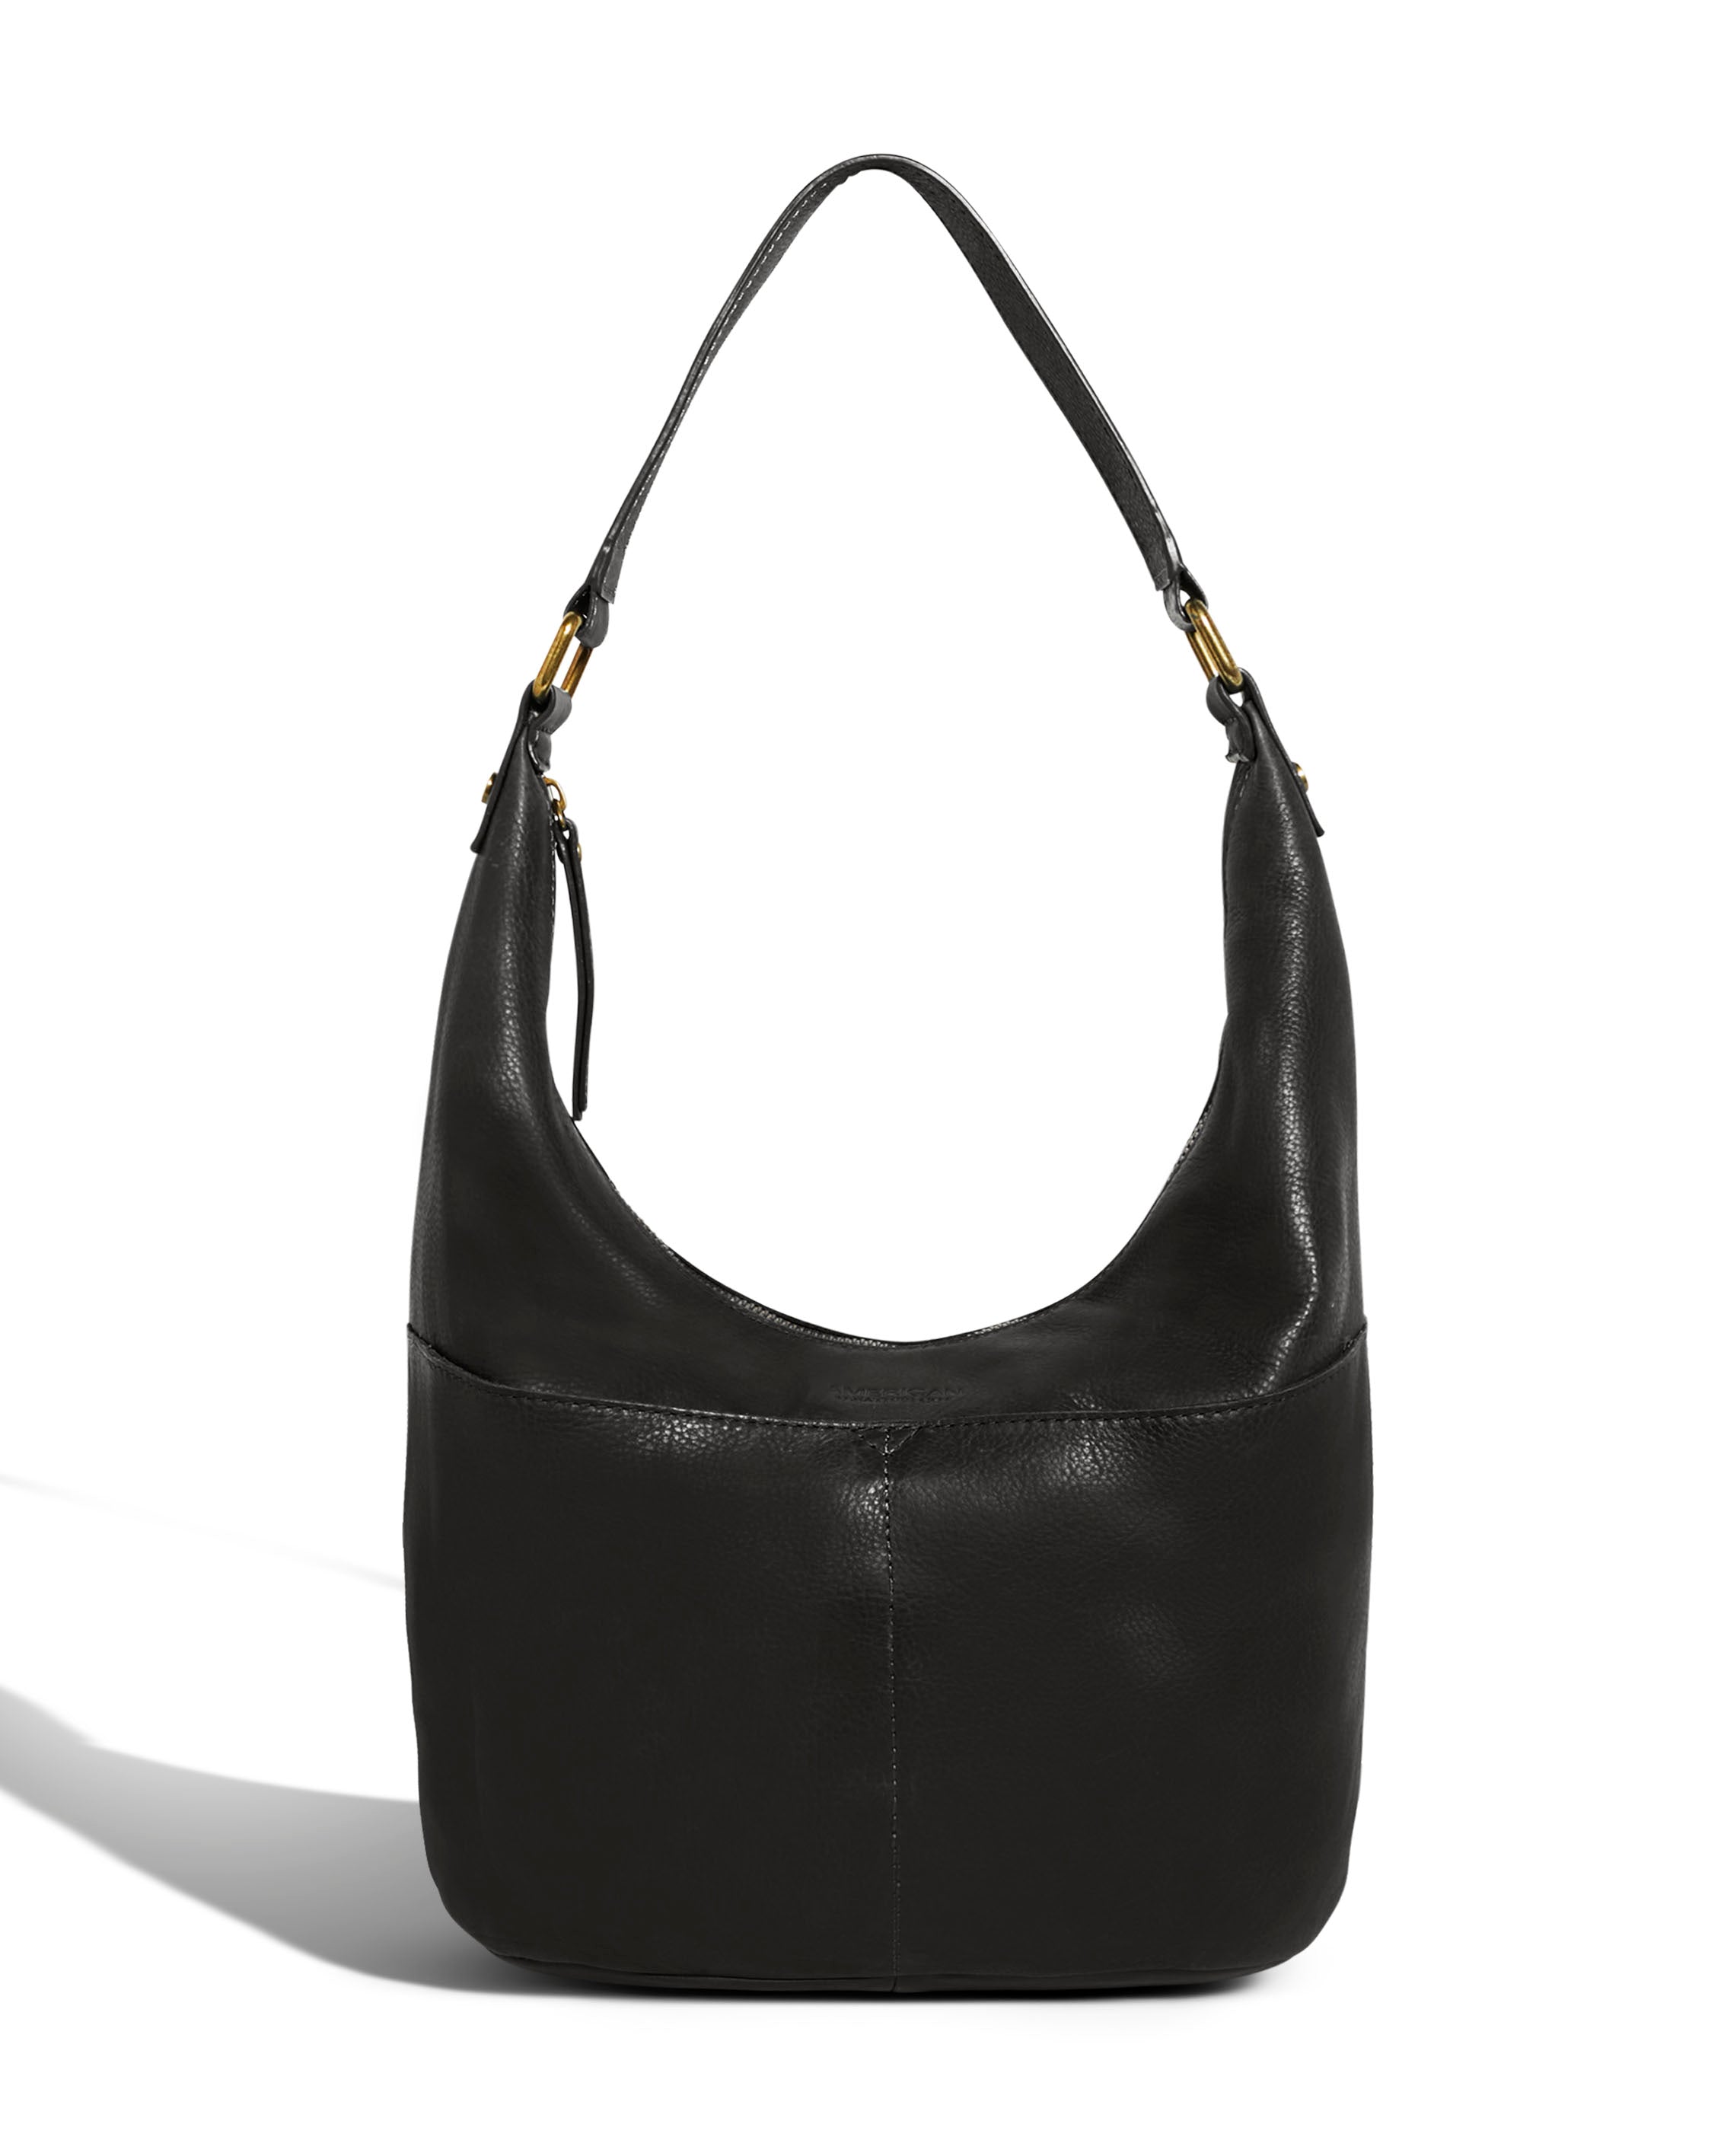 Small Black Leather Hobo Bag - Slouchy Shoulder Purse